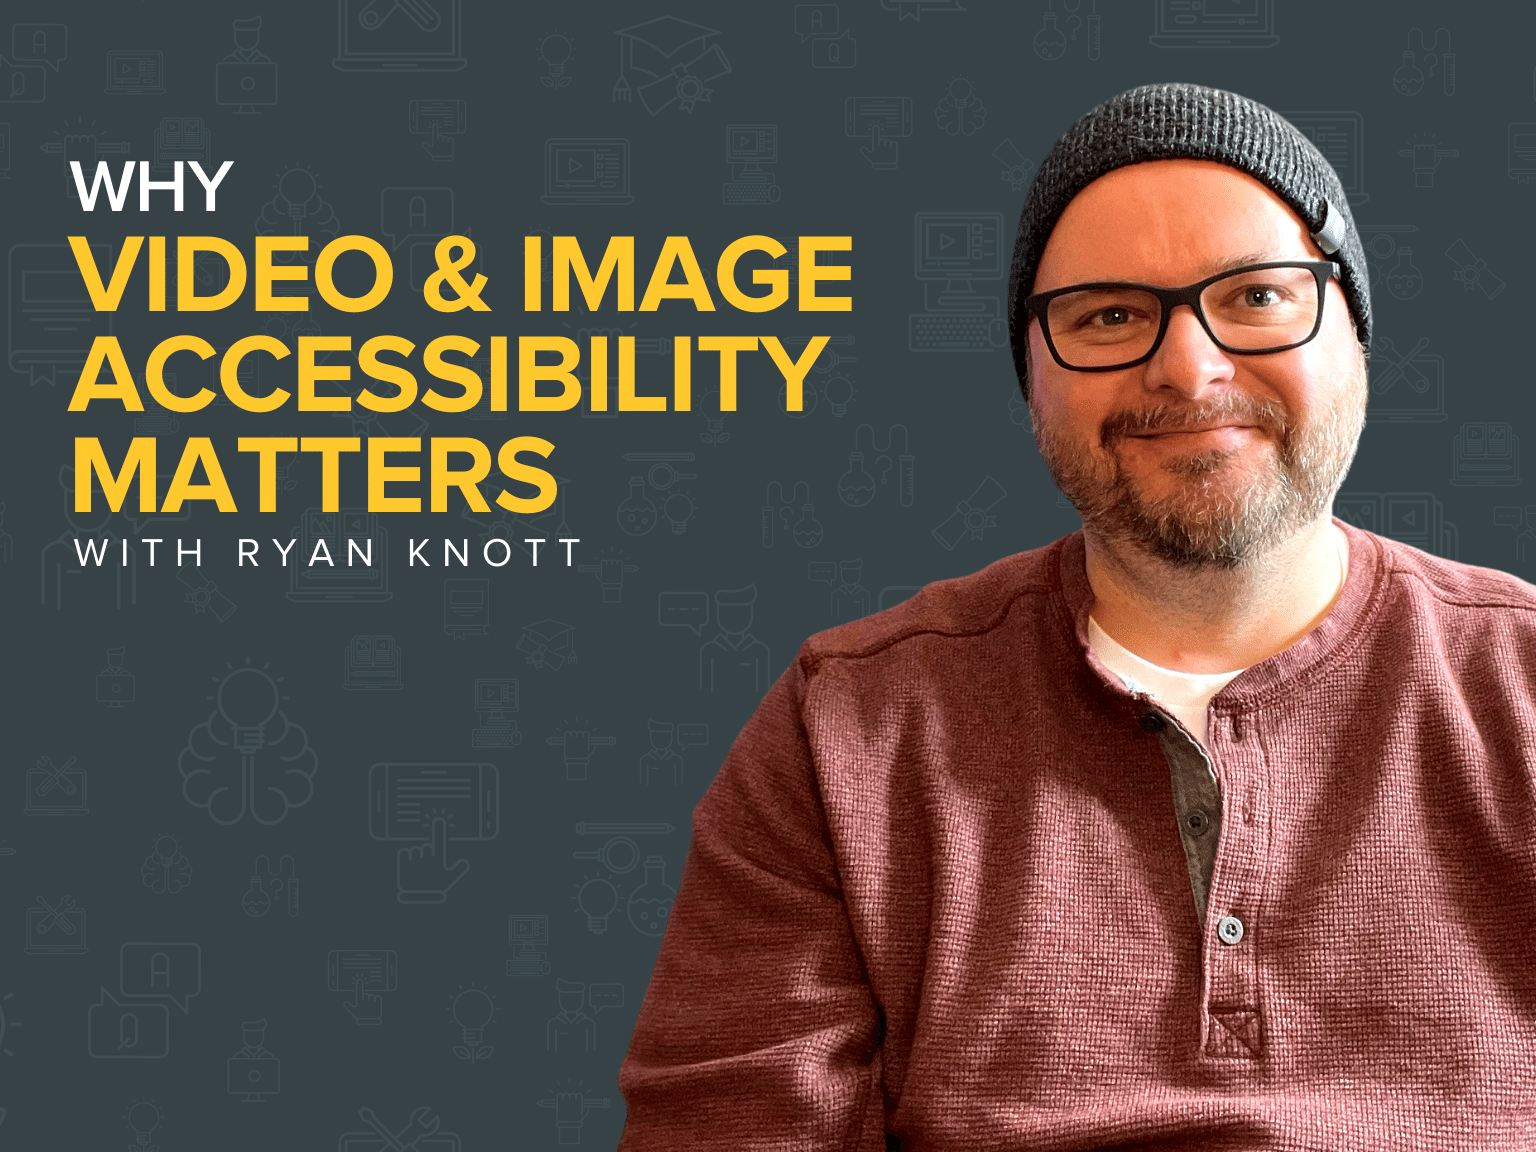 Blog Title: Why Video & Image Accessibility Matters with Ryan Knott